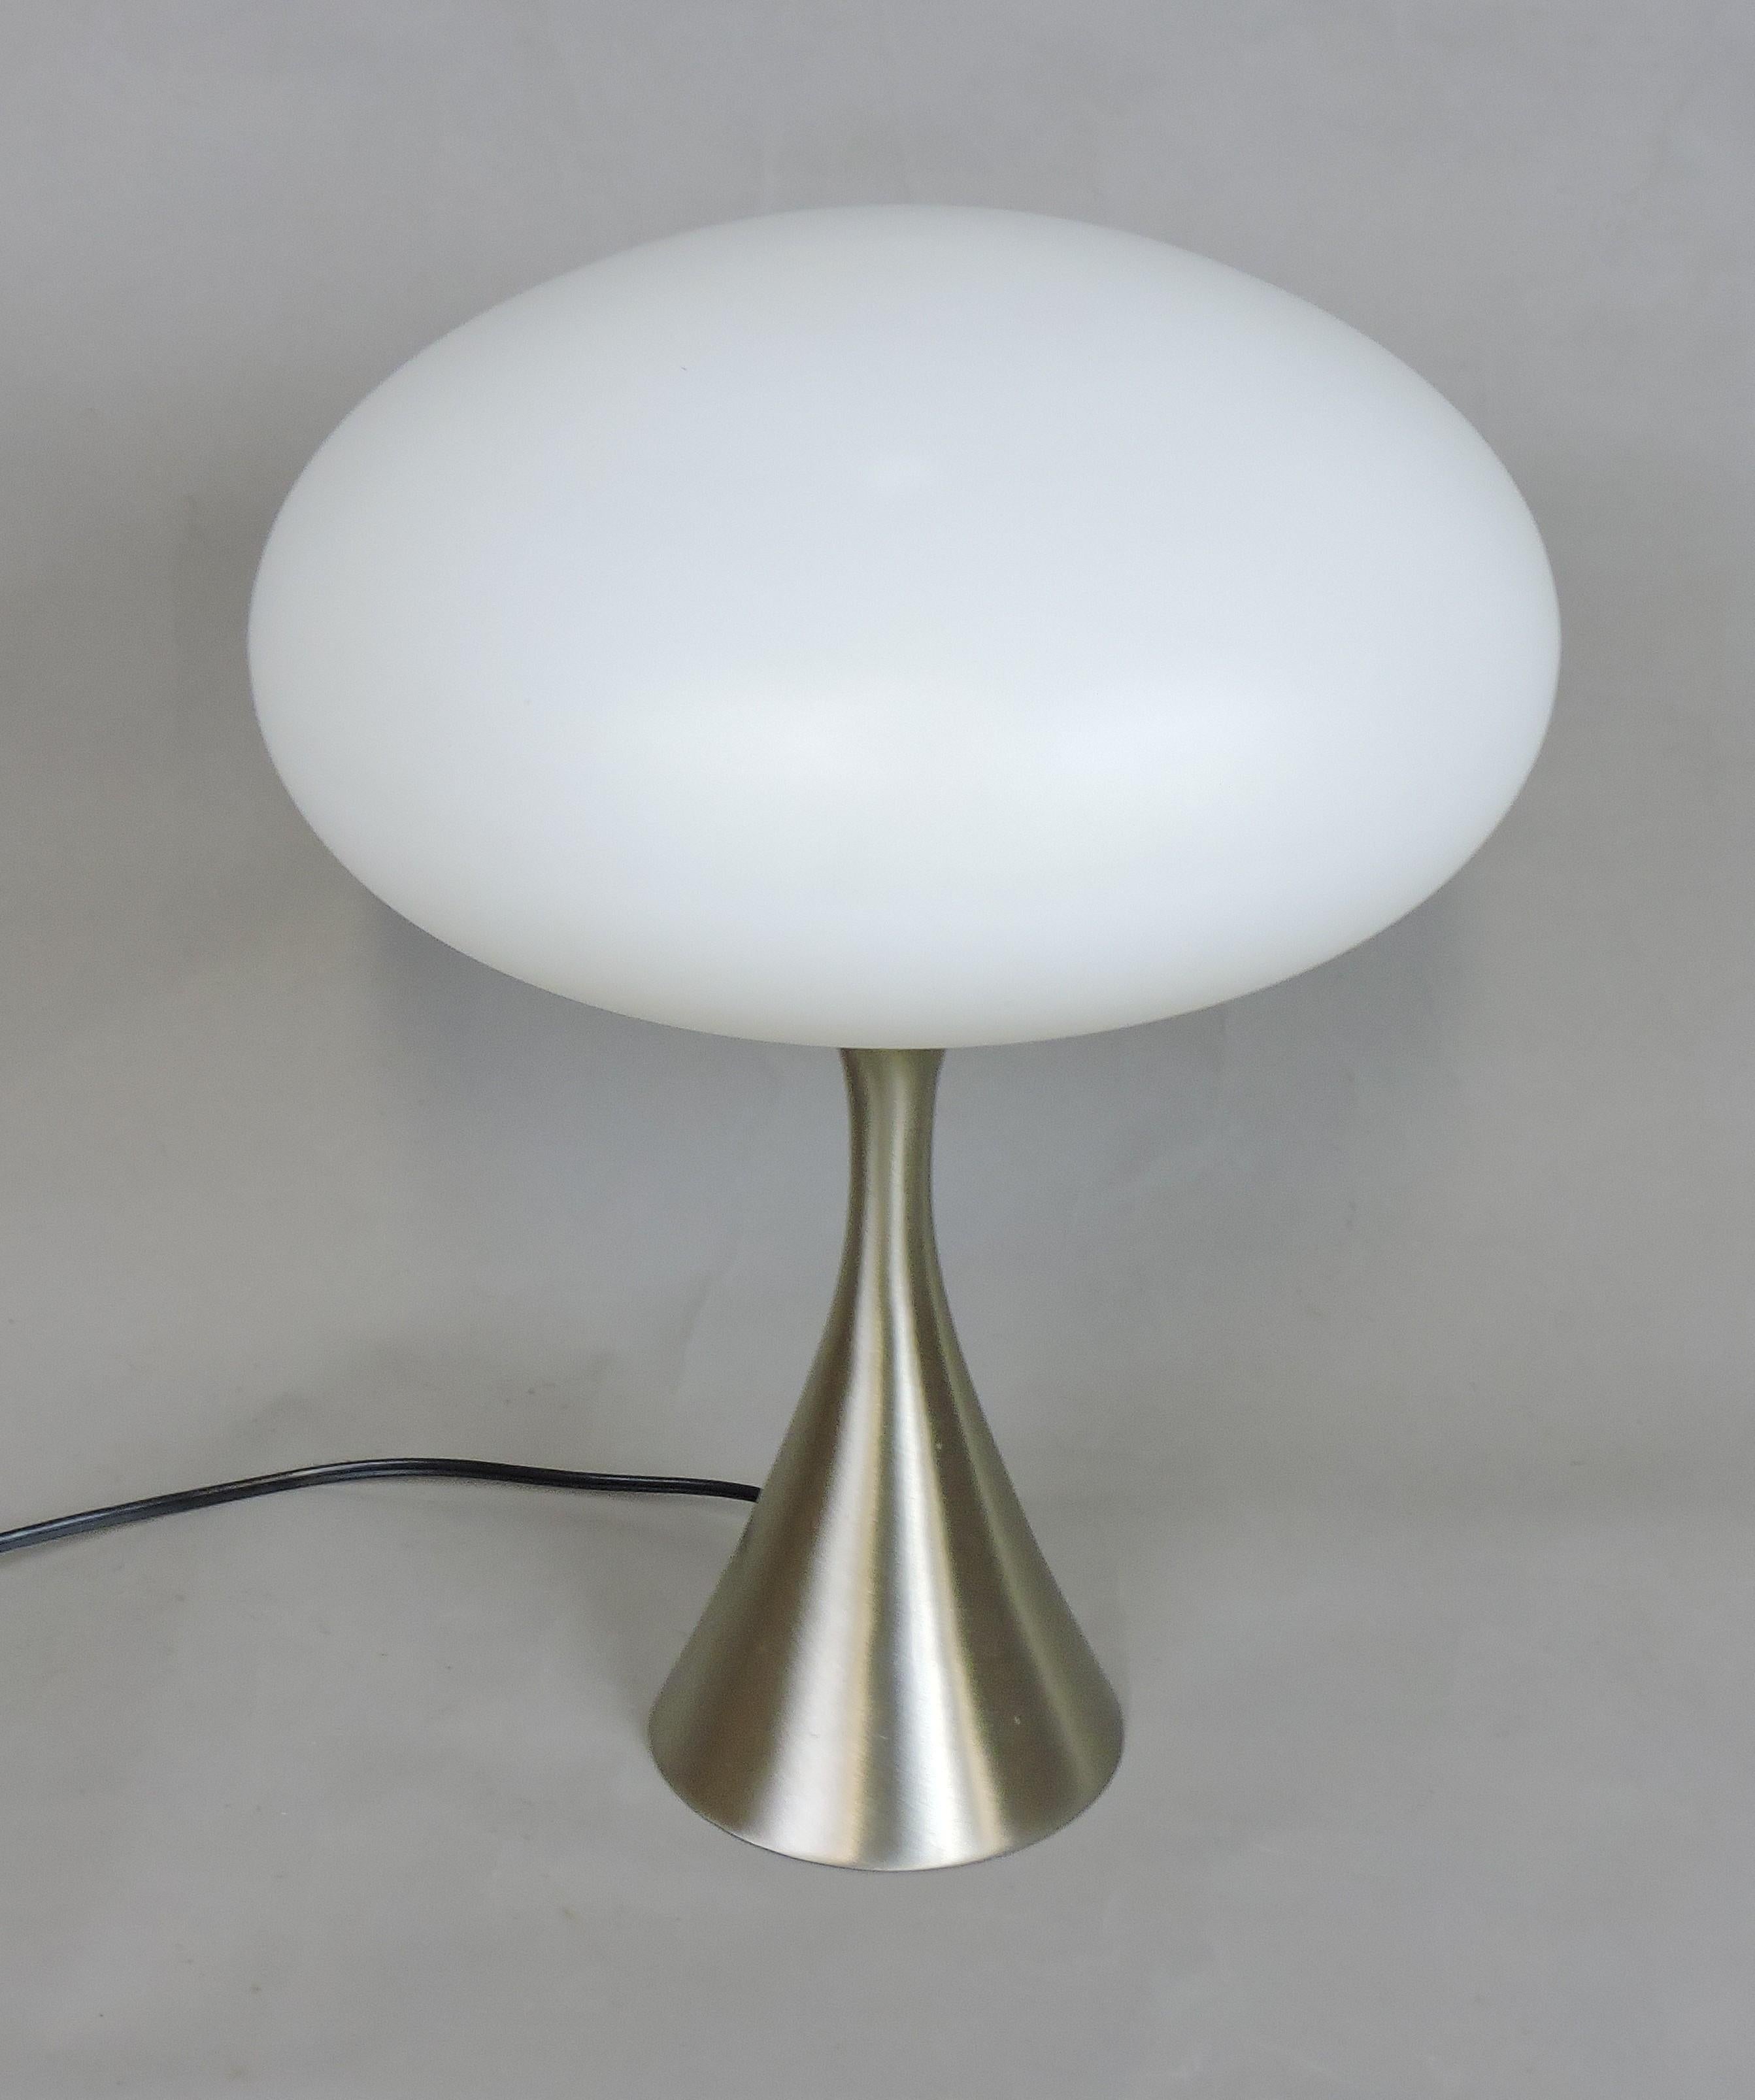 Classic and iconic mushroom table lamp made by high quality lighting manufacturer, Laurel Lamp Company of Newark, NJ. This heavy and well-made lamp has a brushed chrome base with the original frosted hand blown glass shade. It has the original label